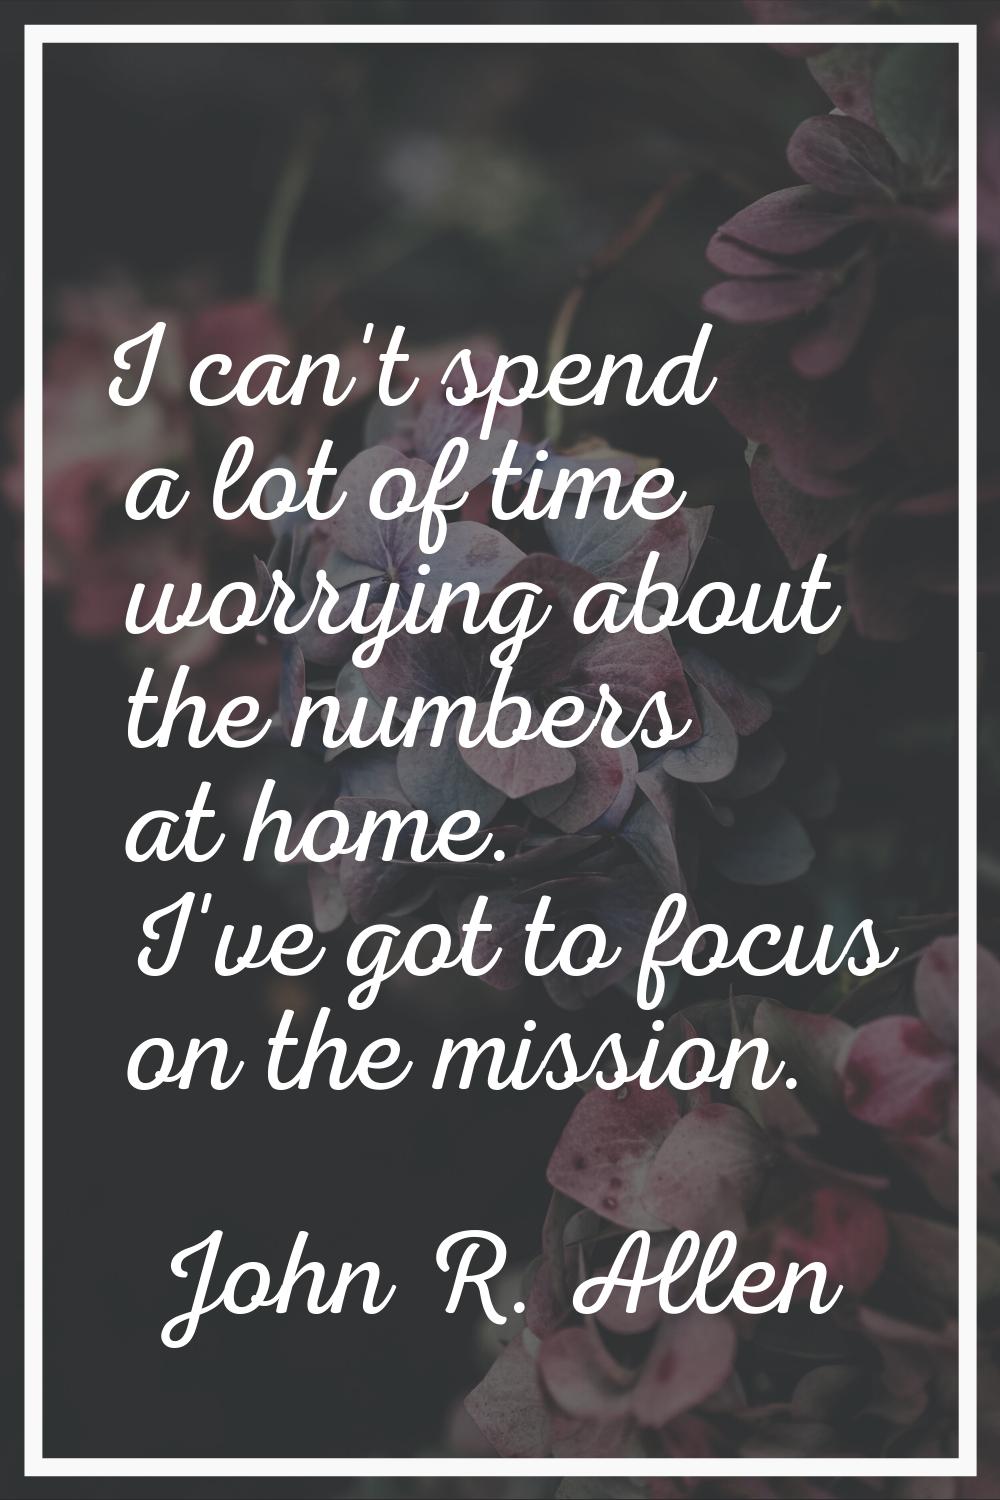 I can't spend a lot of time worrying about the numbers at home. I've got to focus on the mission.